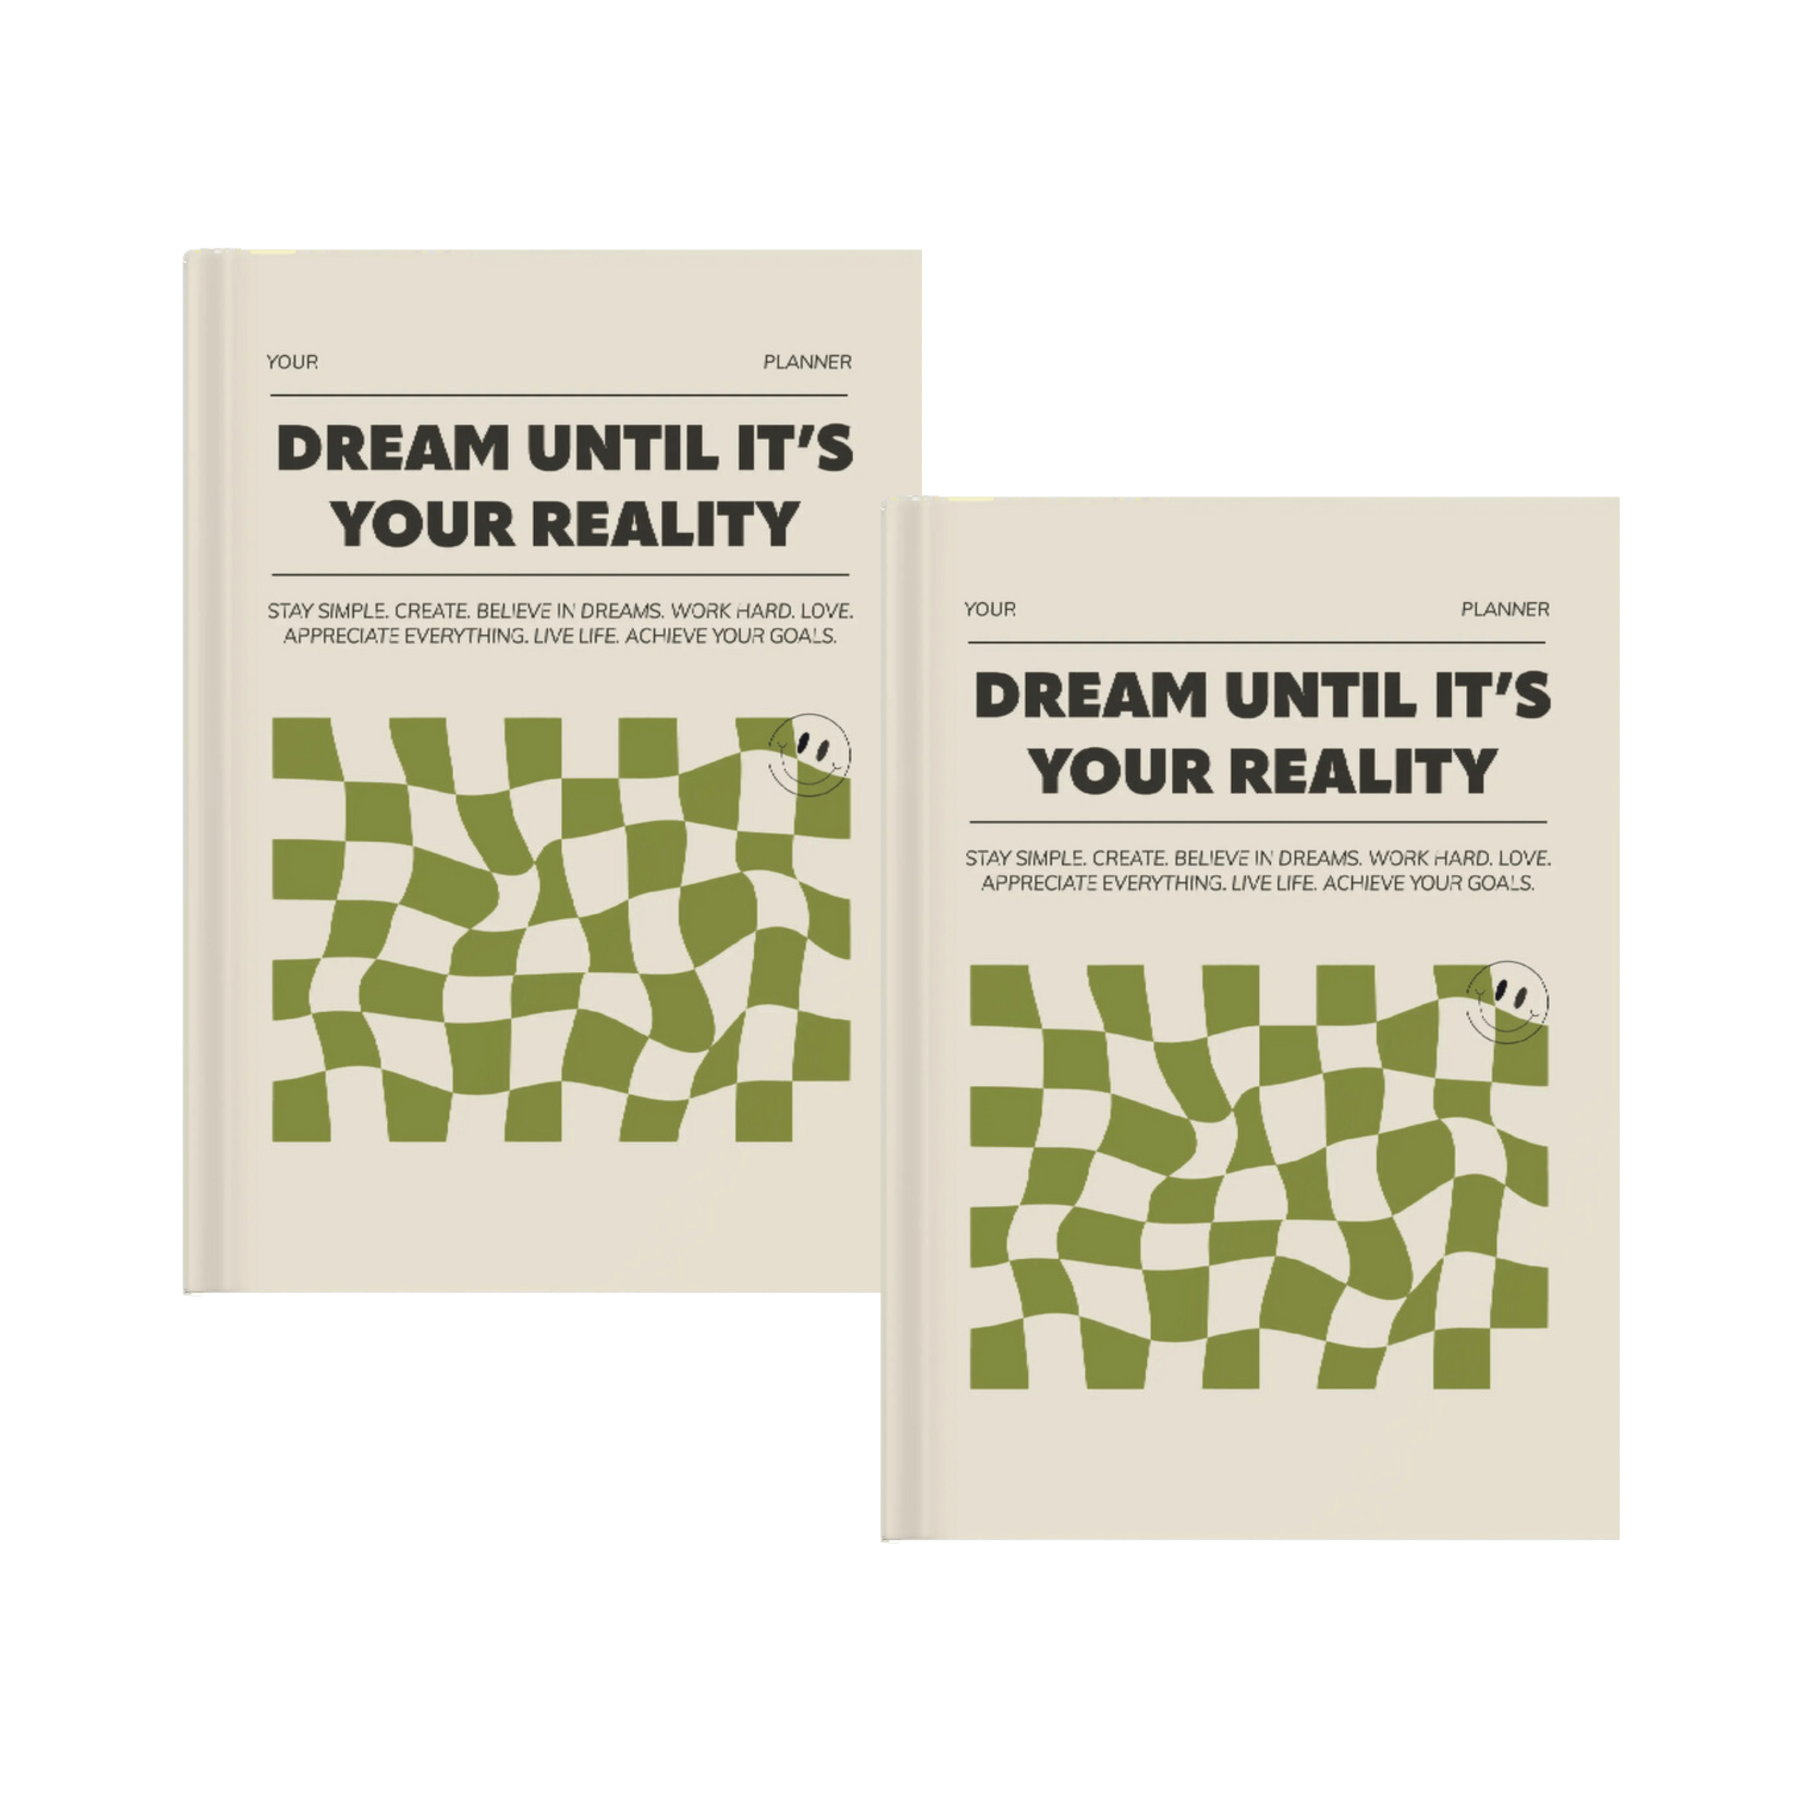 Набір планер + планер , Планер DREAM UNTIL IT'S YOUR REALITY, Планер DREAM UNTIL IT'S YOUR REALITY